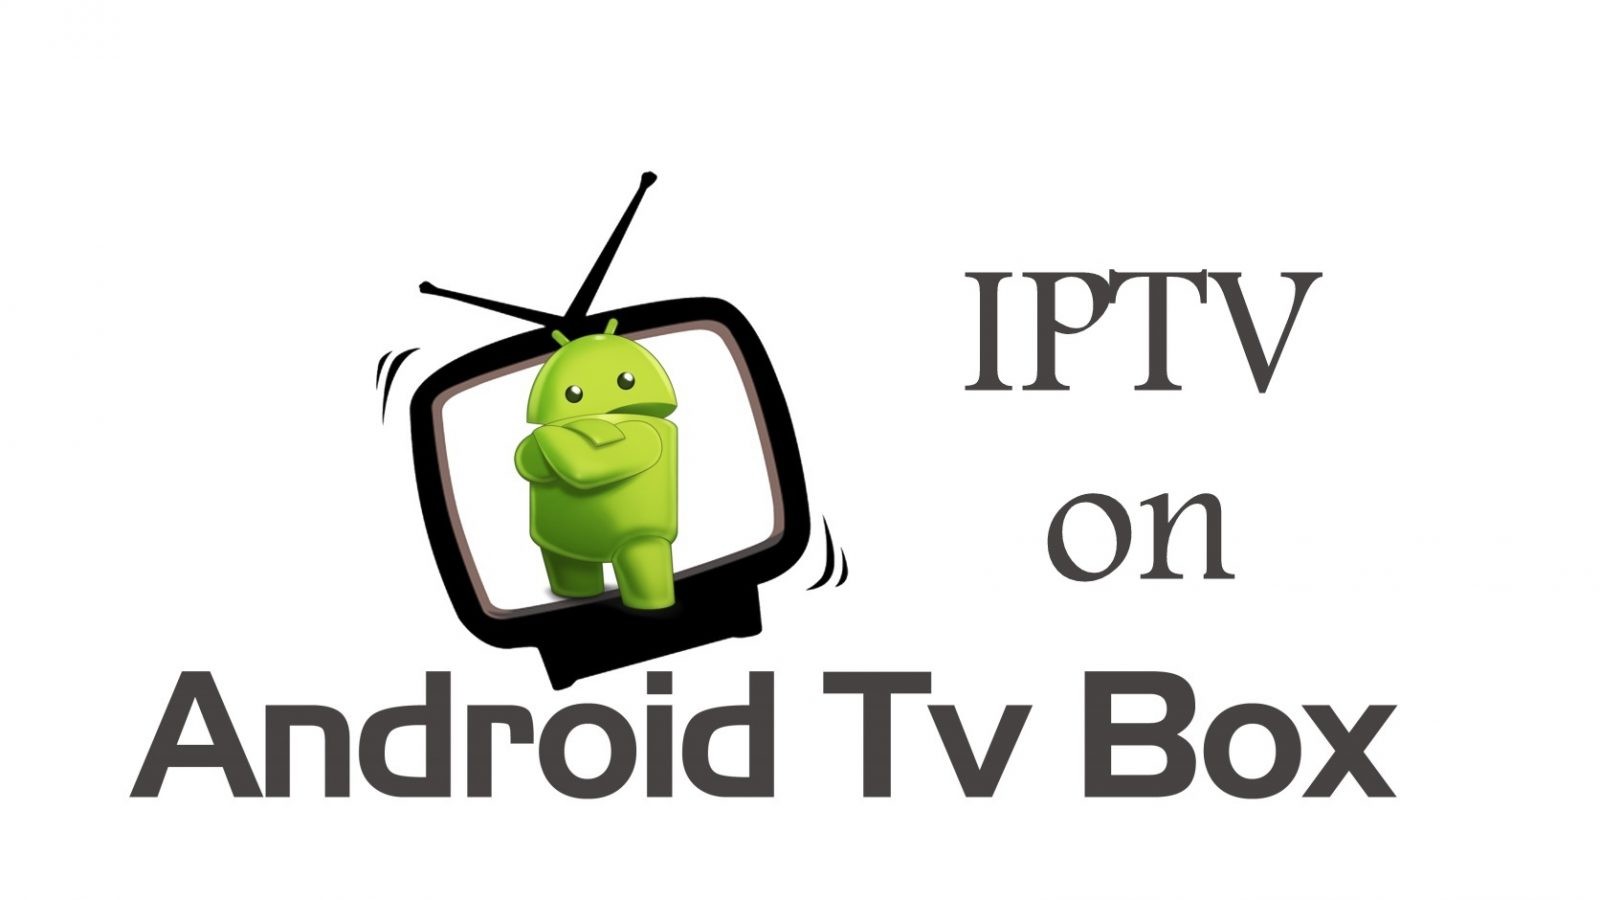 How to install IPTV on Android Box?